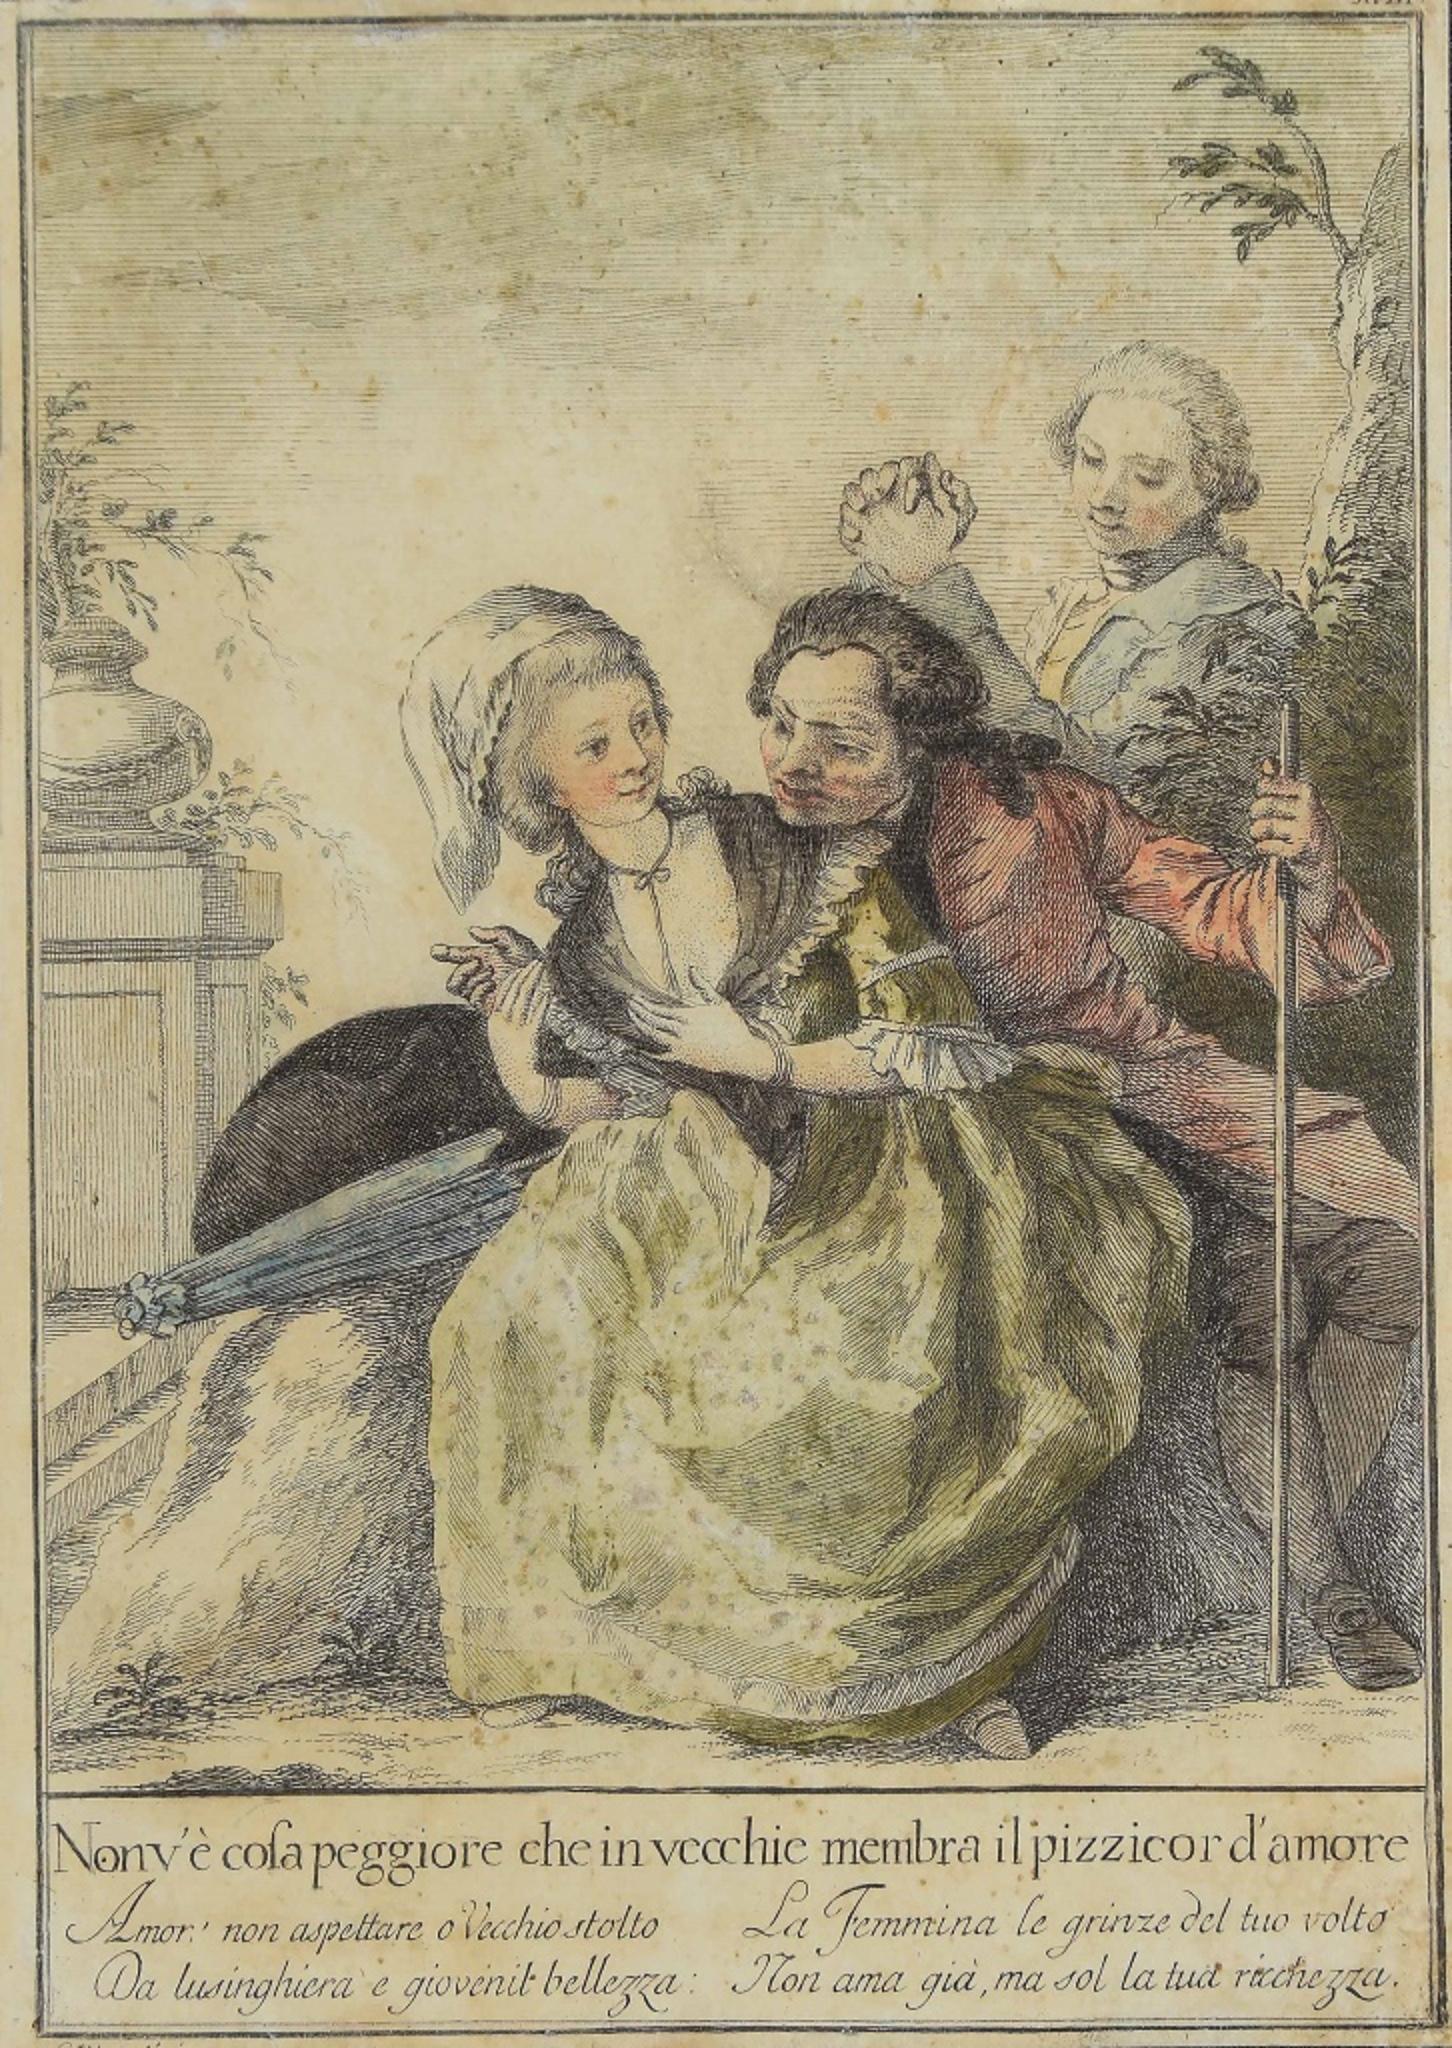 Tuscan Proverbs is an original etching realized by Carlo Lasinio in 1786.

Etching and watercolour technique, in good conditions, except for some stains on the back of the yellowed paper.  Image Dimensions: 27.5x19 cm.

Carlo Lasinio (Treviso